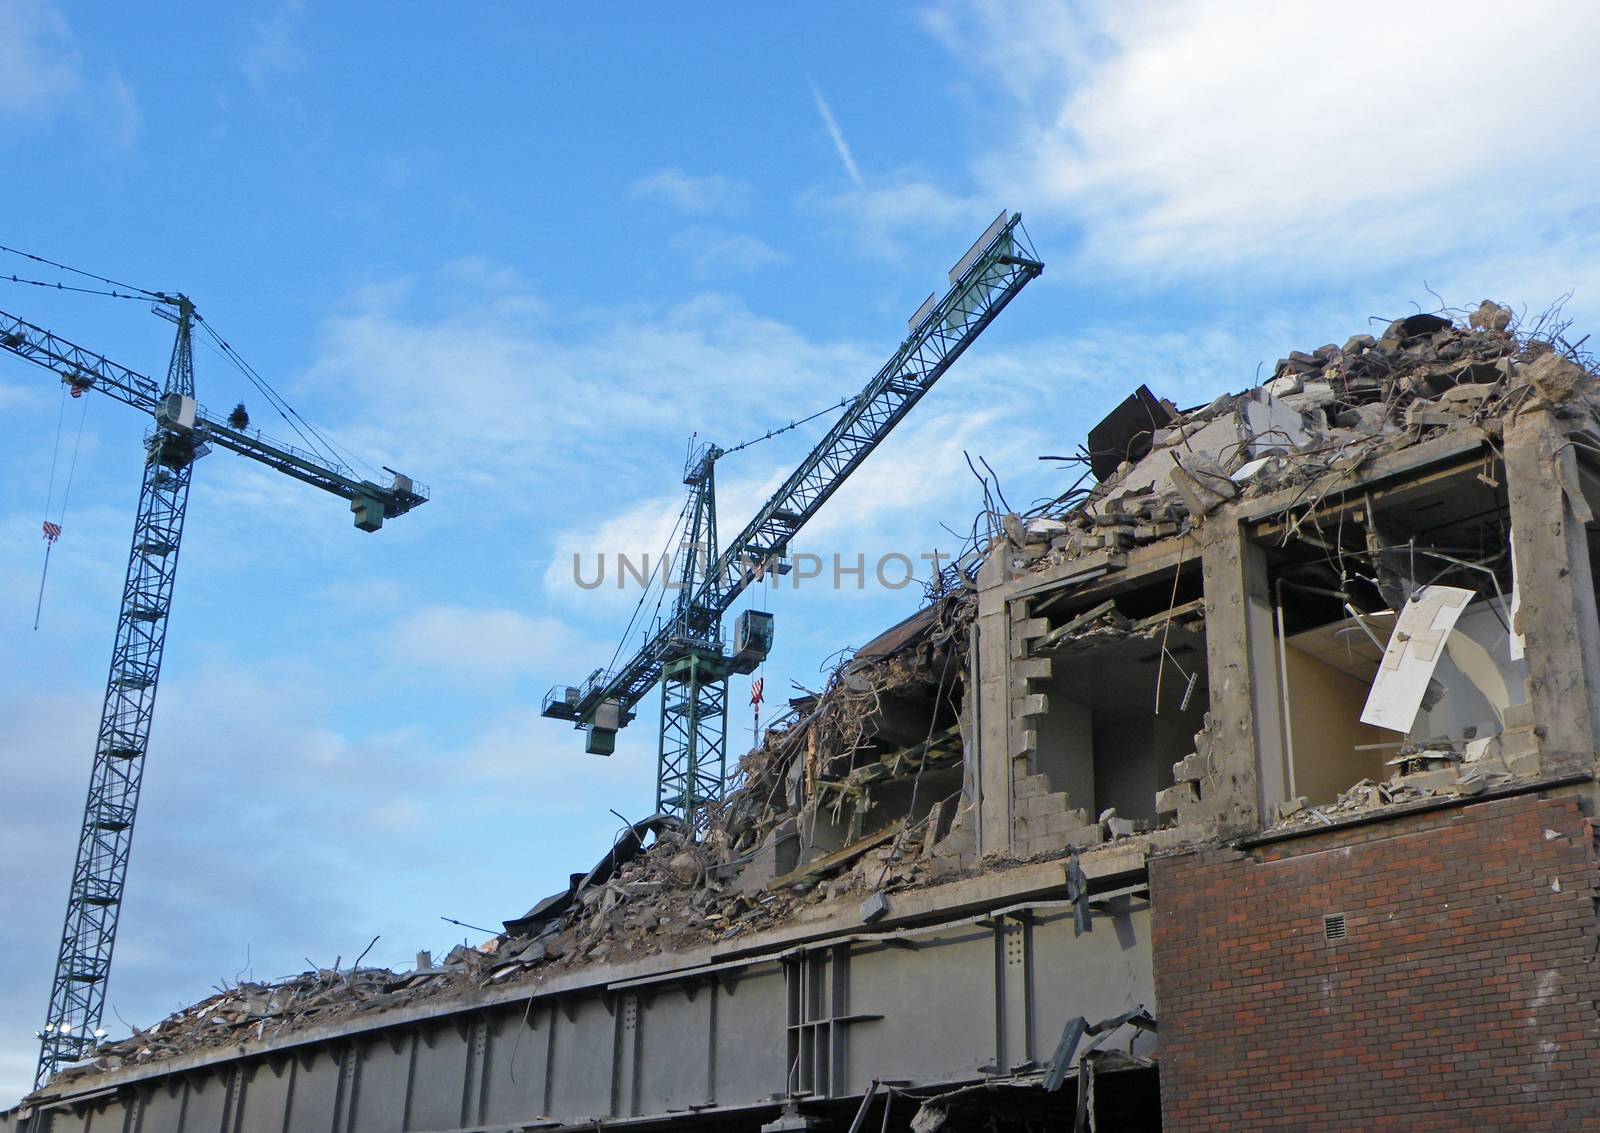 large cranes over a large concrete building being demolished with exposed walls during redevelopment of a large urban site